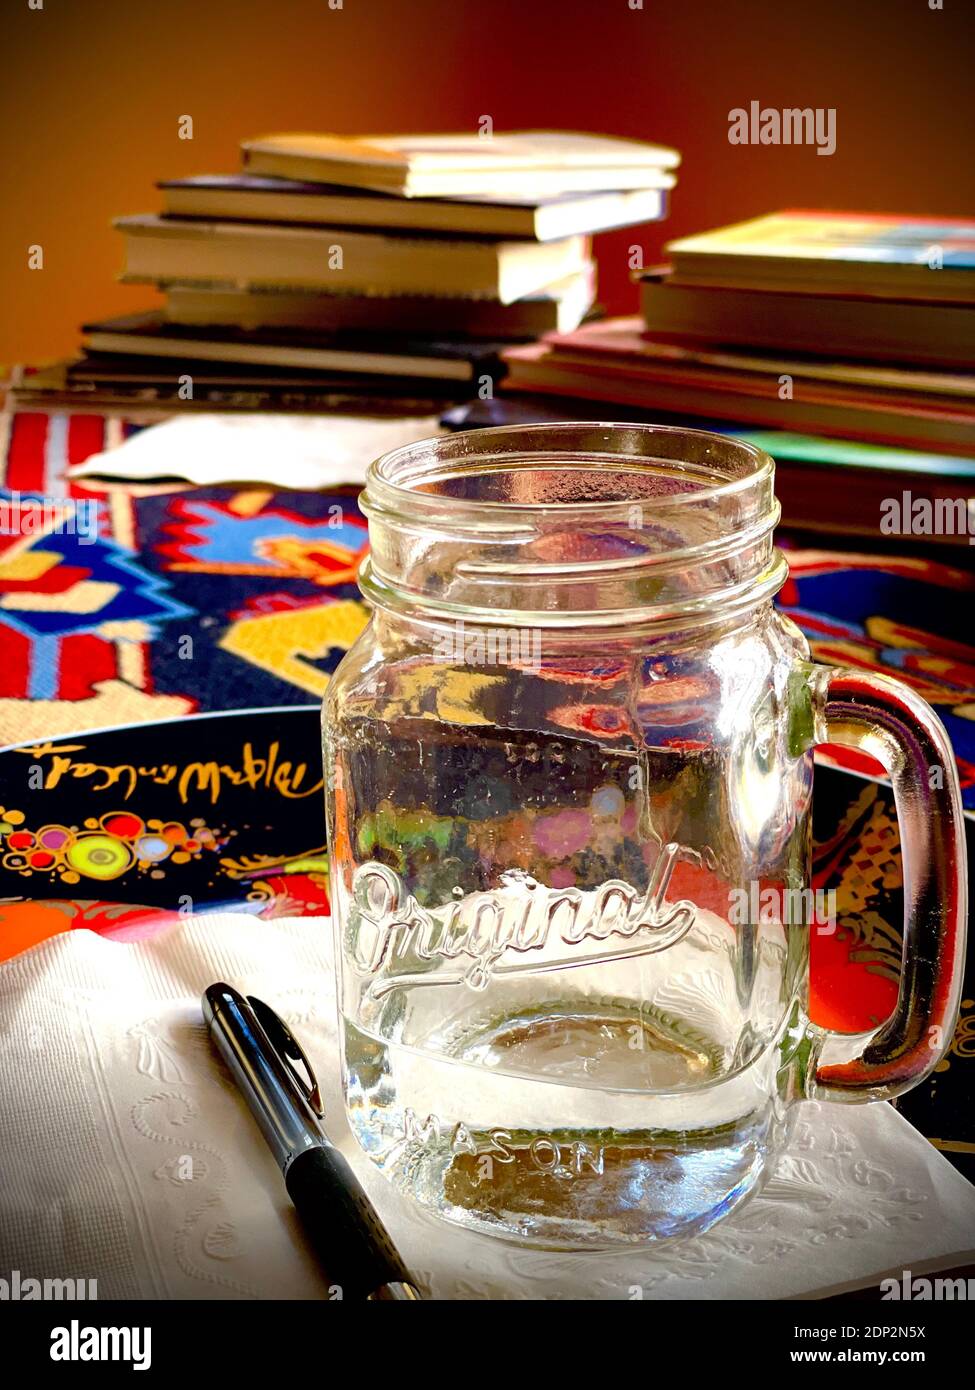 Original Mason Jar glass with handle on colorful material with stack of books in background.  Backlit, vertical, color photograph Stock Photo